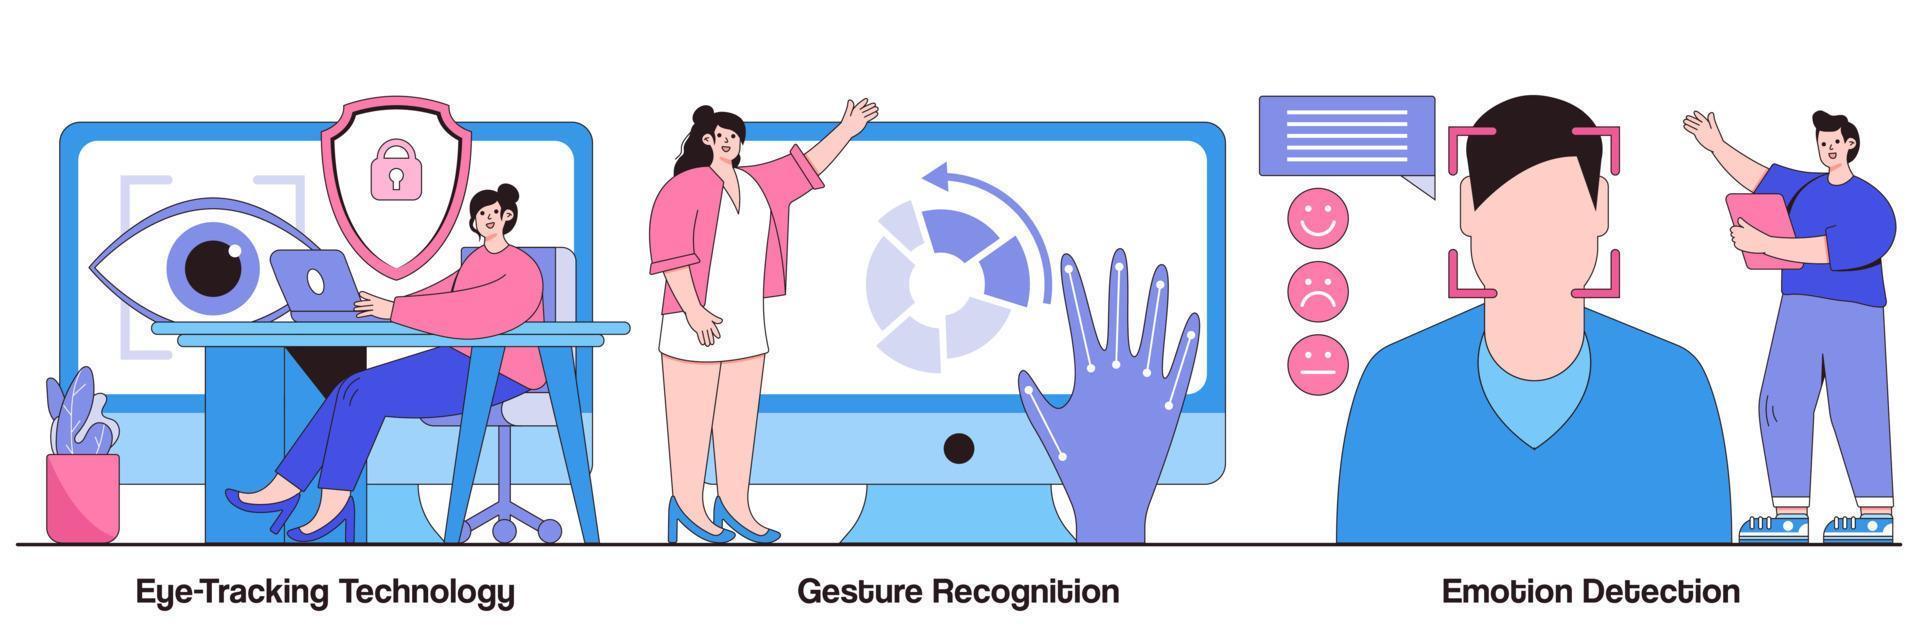 Eye-tracking technology, gesture recognition, emotion detection concept with tiny people. Modern sensor tech vector illustration set. Human-computer and user interface interaction methods metaphor